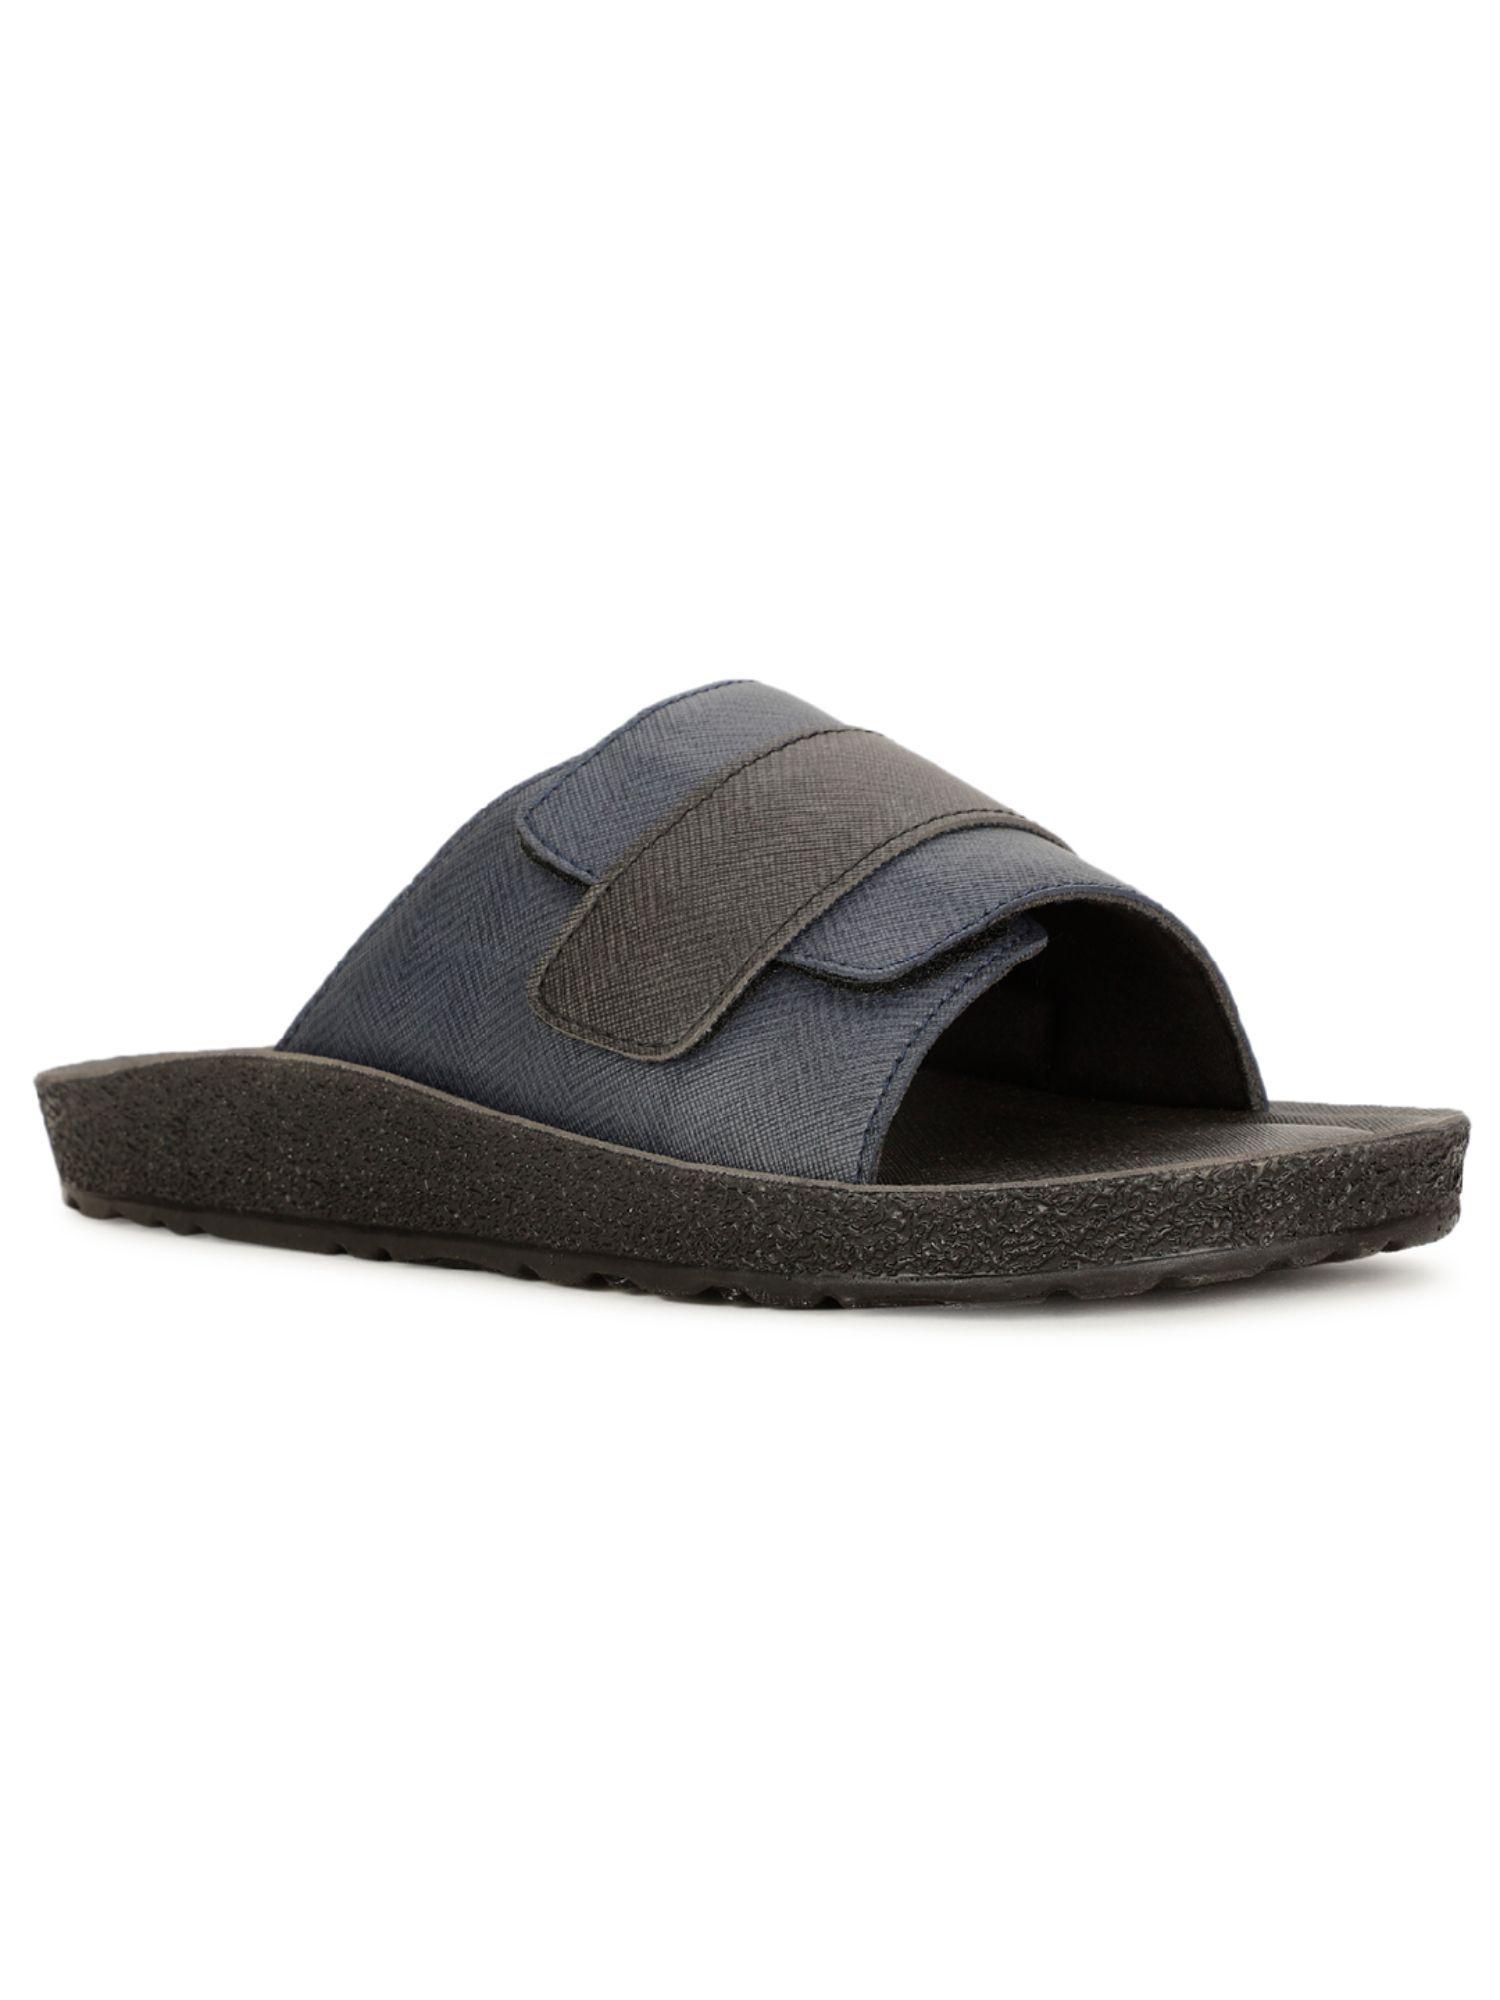 mens navy blue slip on casual sandals